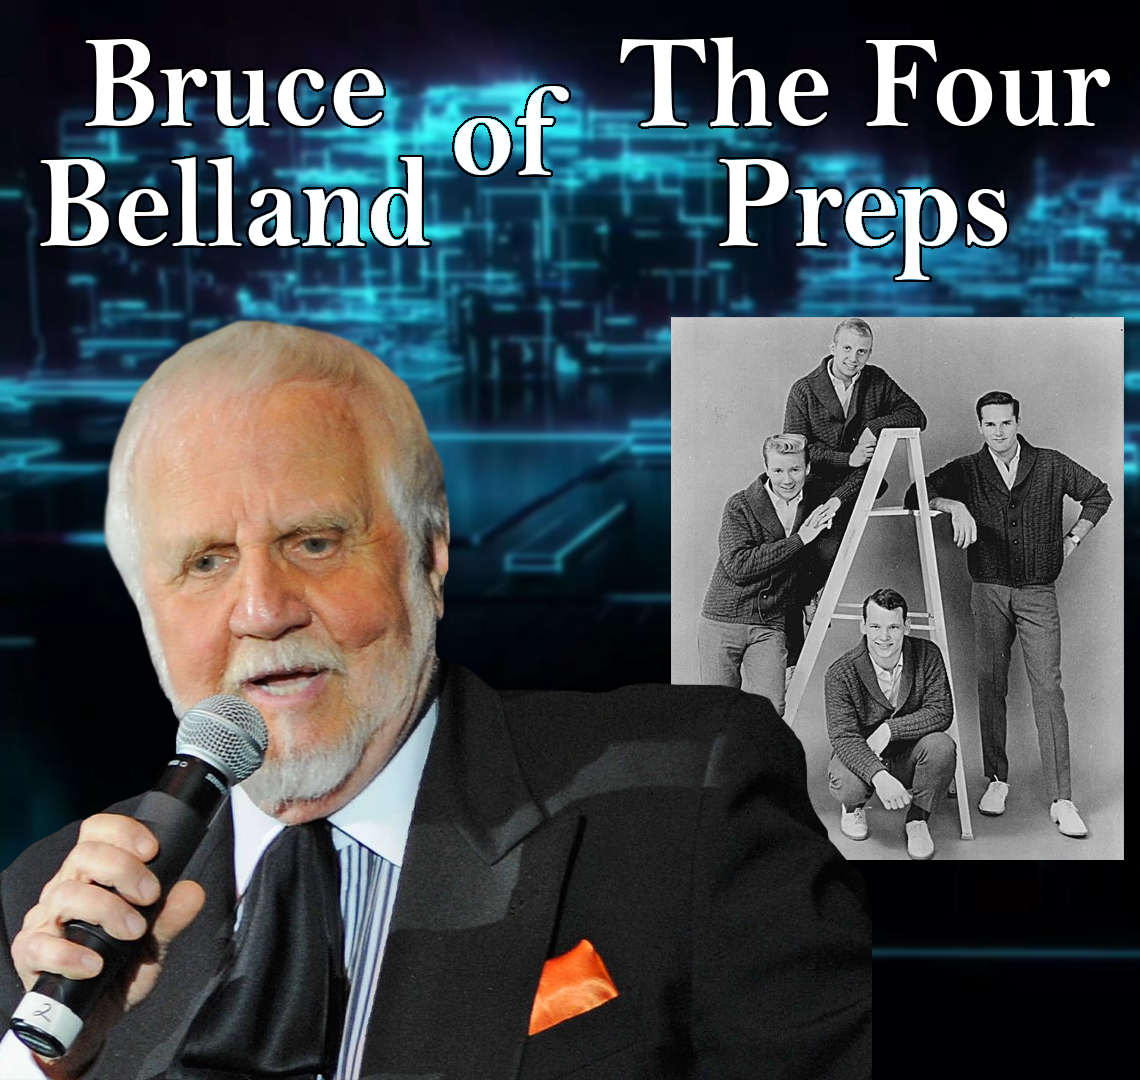 Bruce Belland (Founding Member of The Four Preps) Guests On Harvey Brownstone Interviews